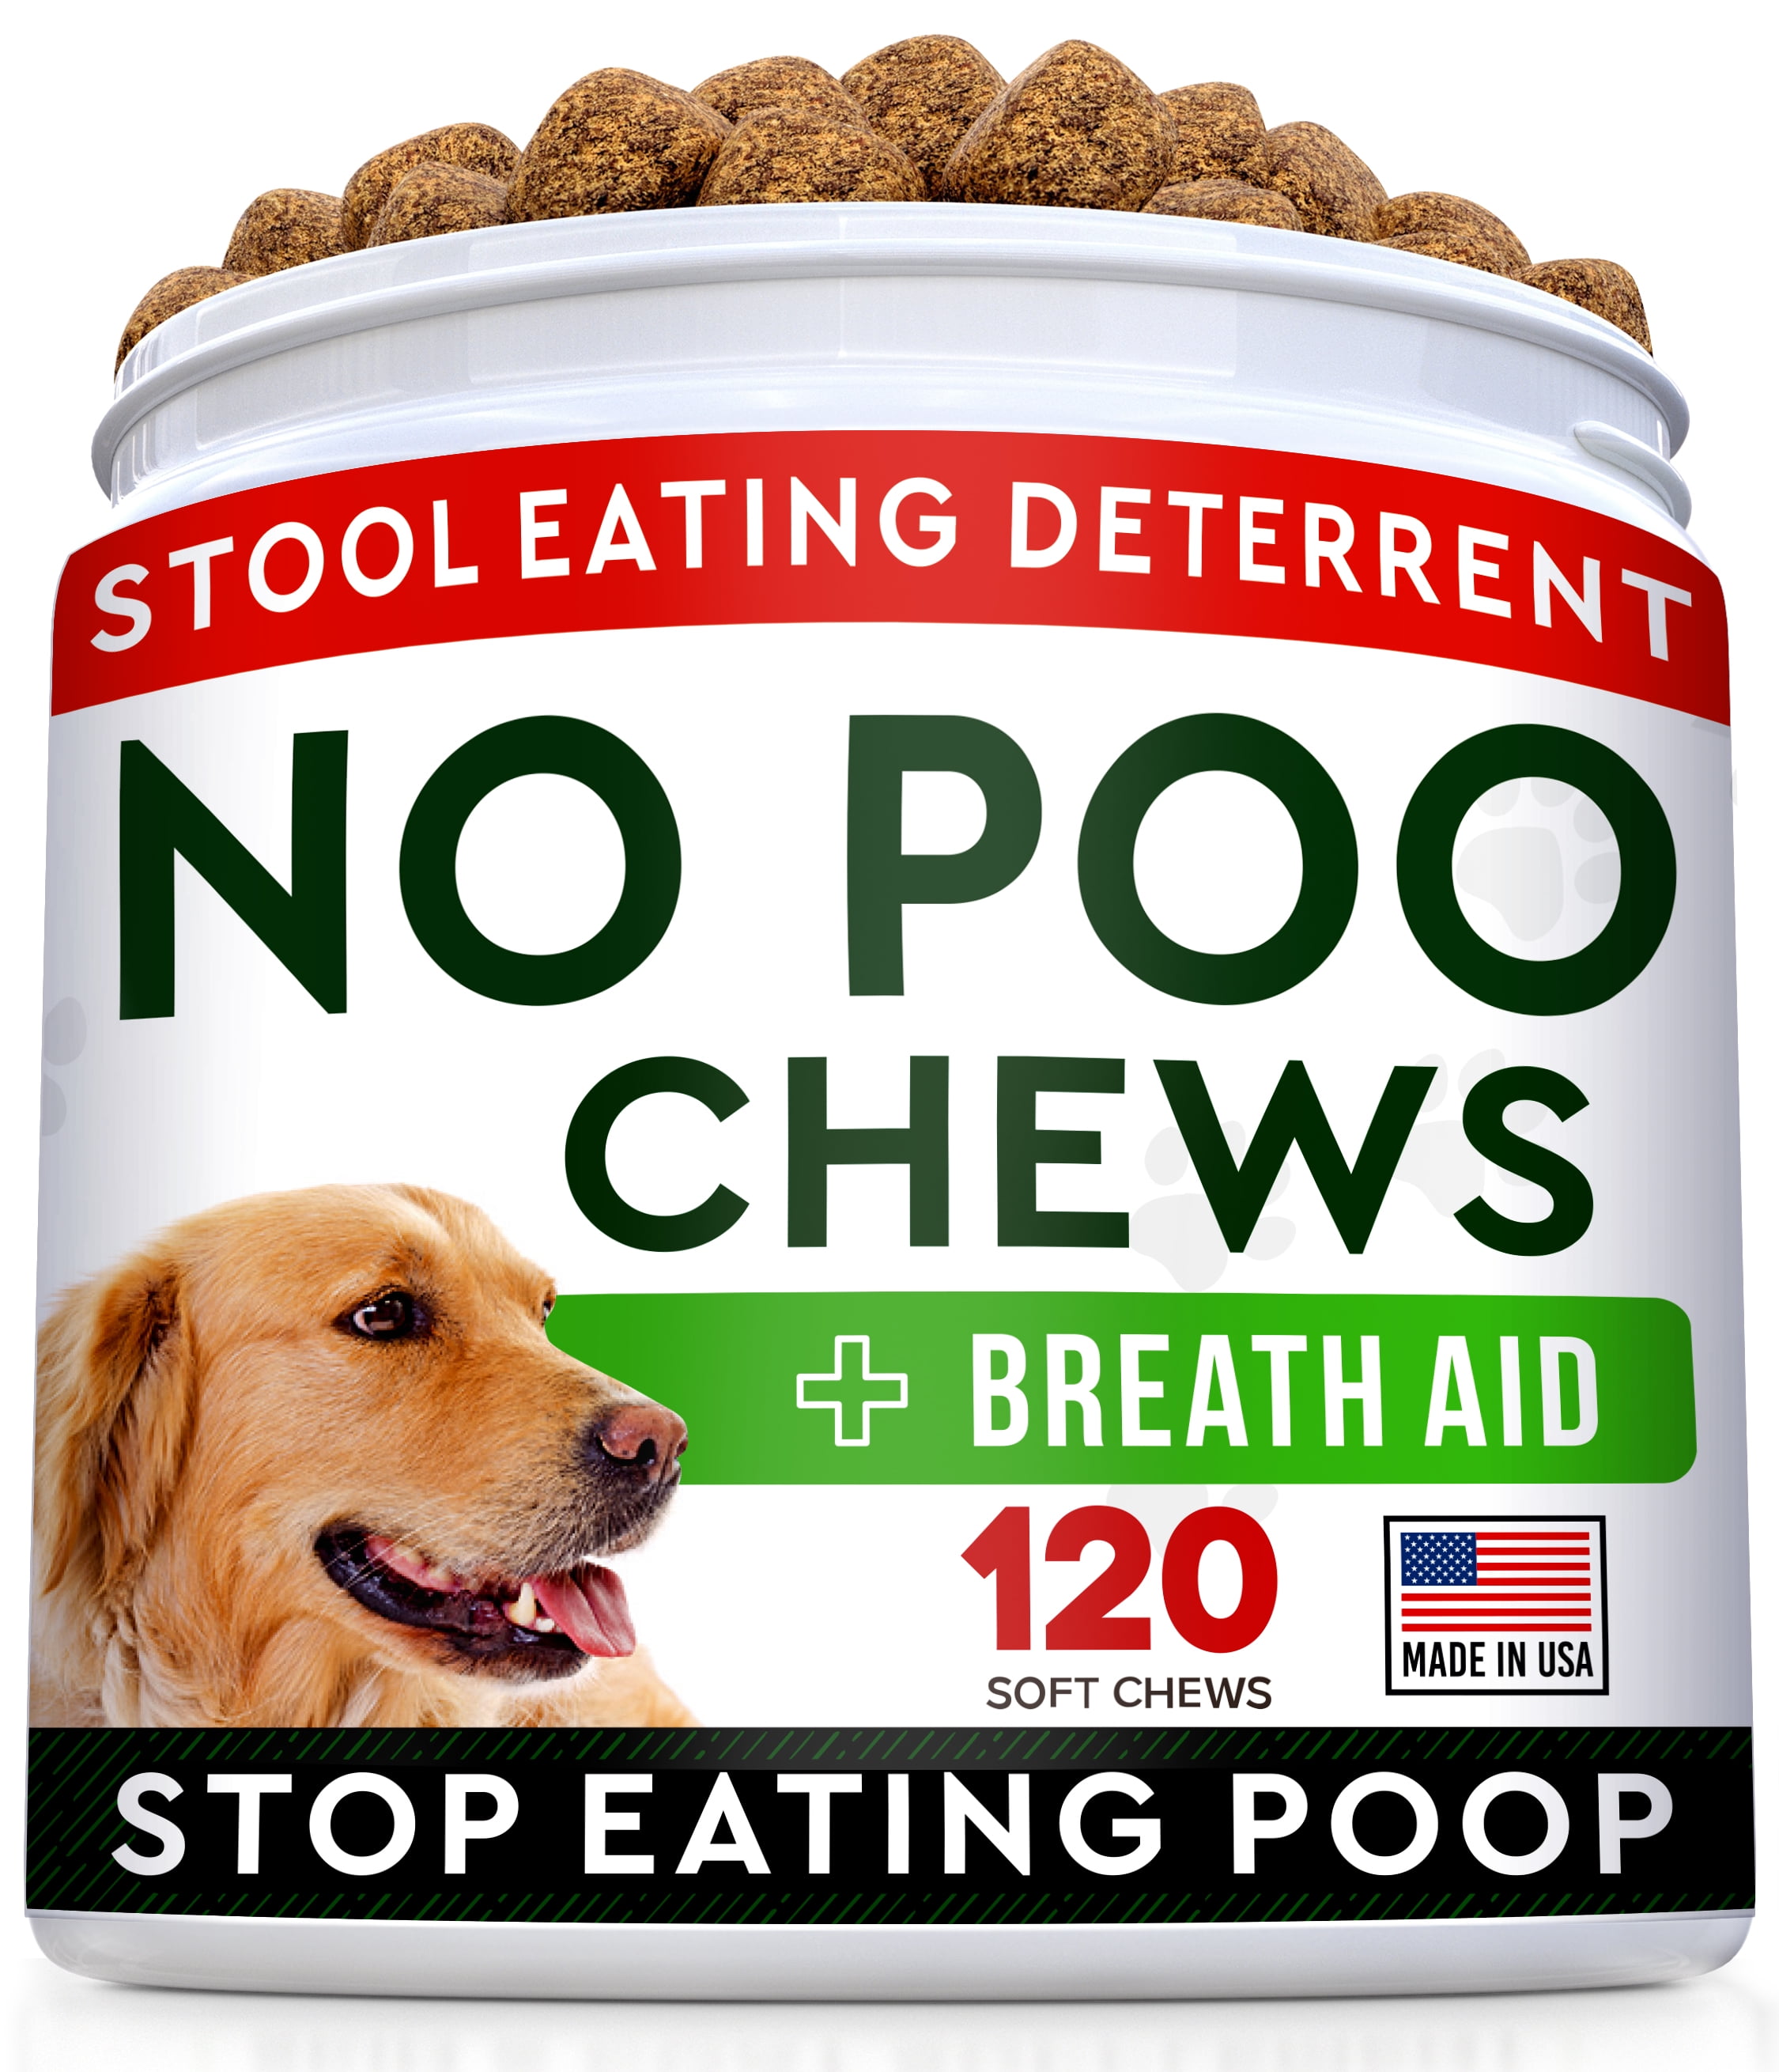 Coprophagia in dogs - Does your dog eat Poop?